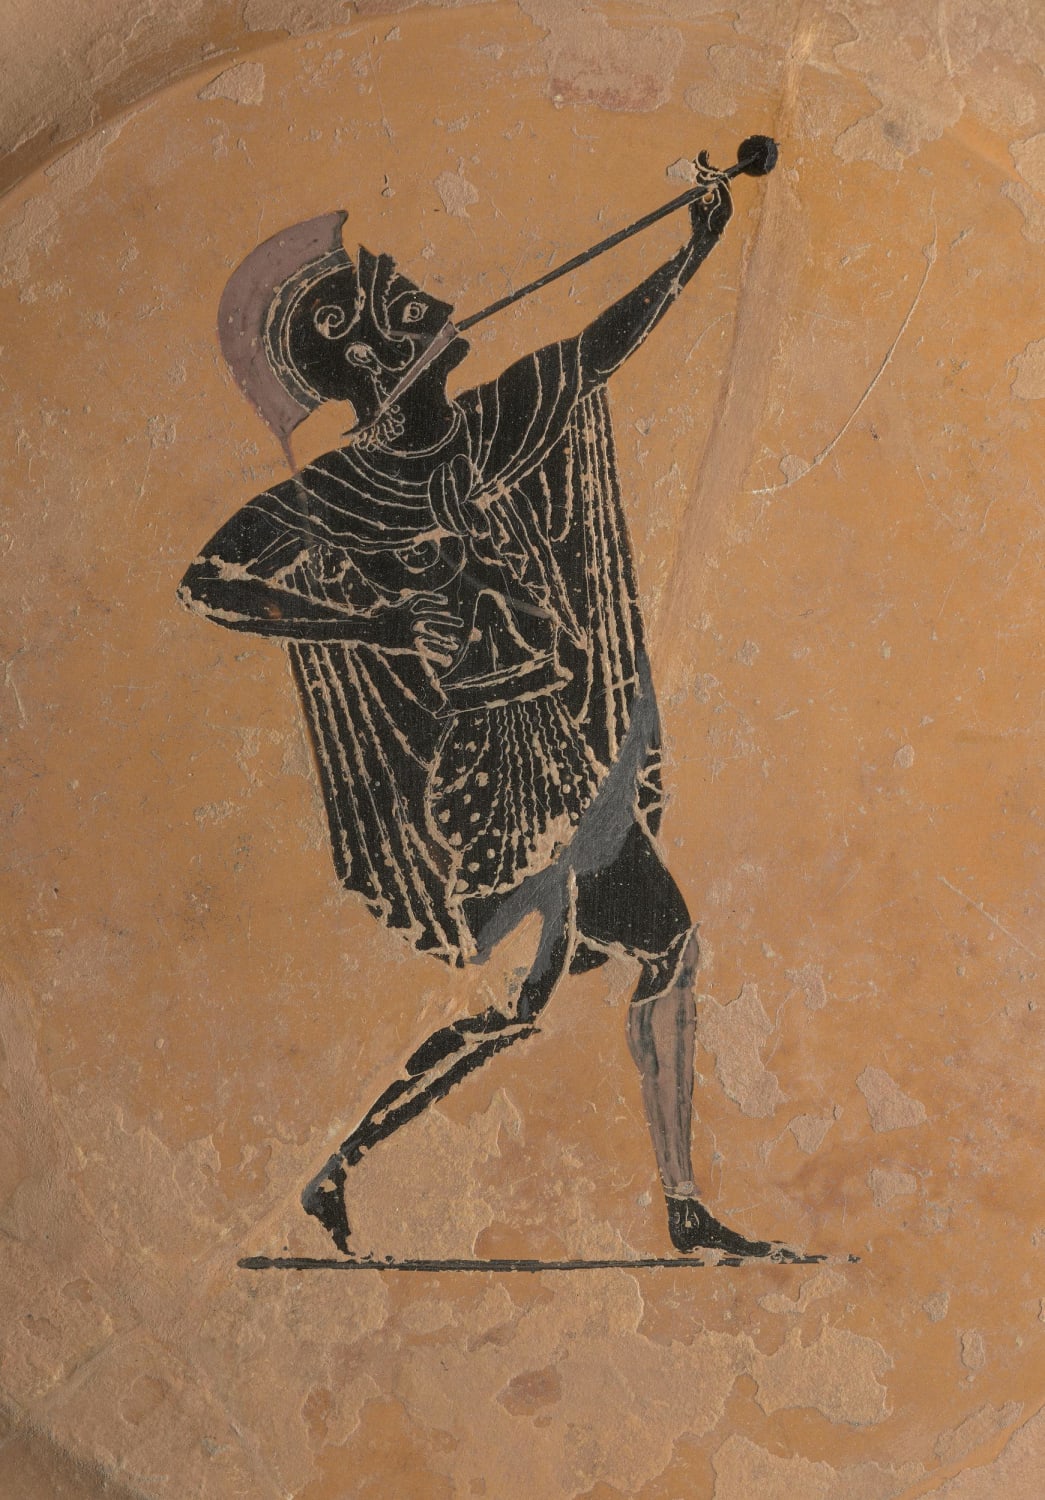 Black-figured pinax (plate) showing a soldier blowing a trumpet (salpinx). Greek made in Athens around 520 BC. Attributed to the painter Psiax.